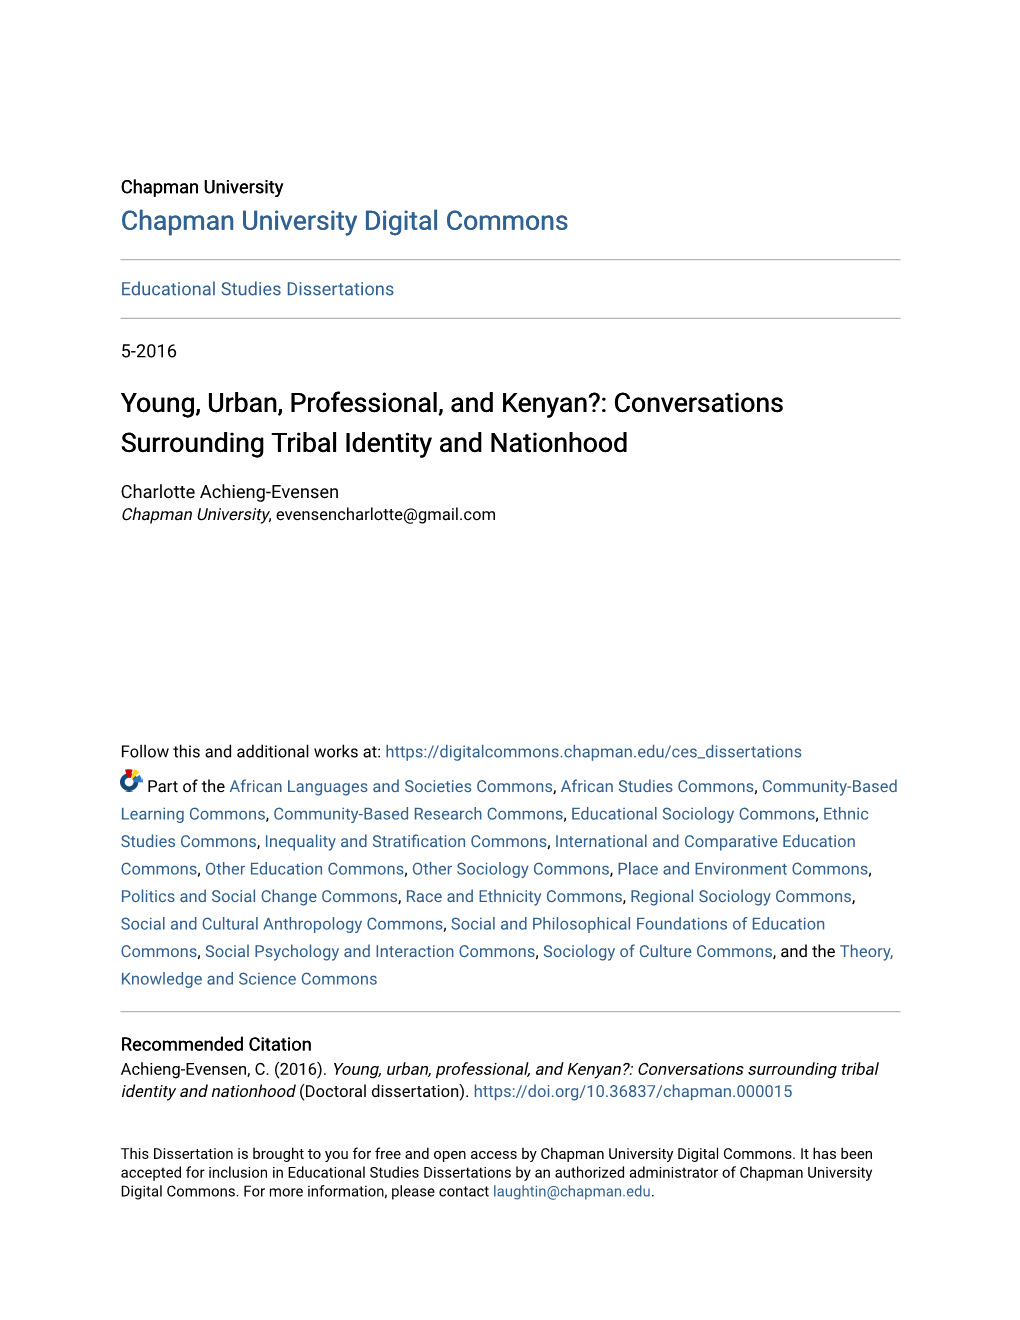 Young, Urban, Professional, and Kenyan?: Conversations Surrounding Tribal Identity and Nationhood